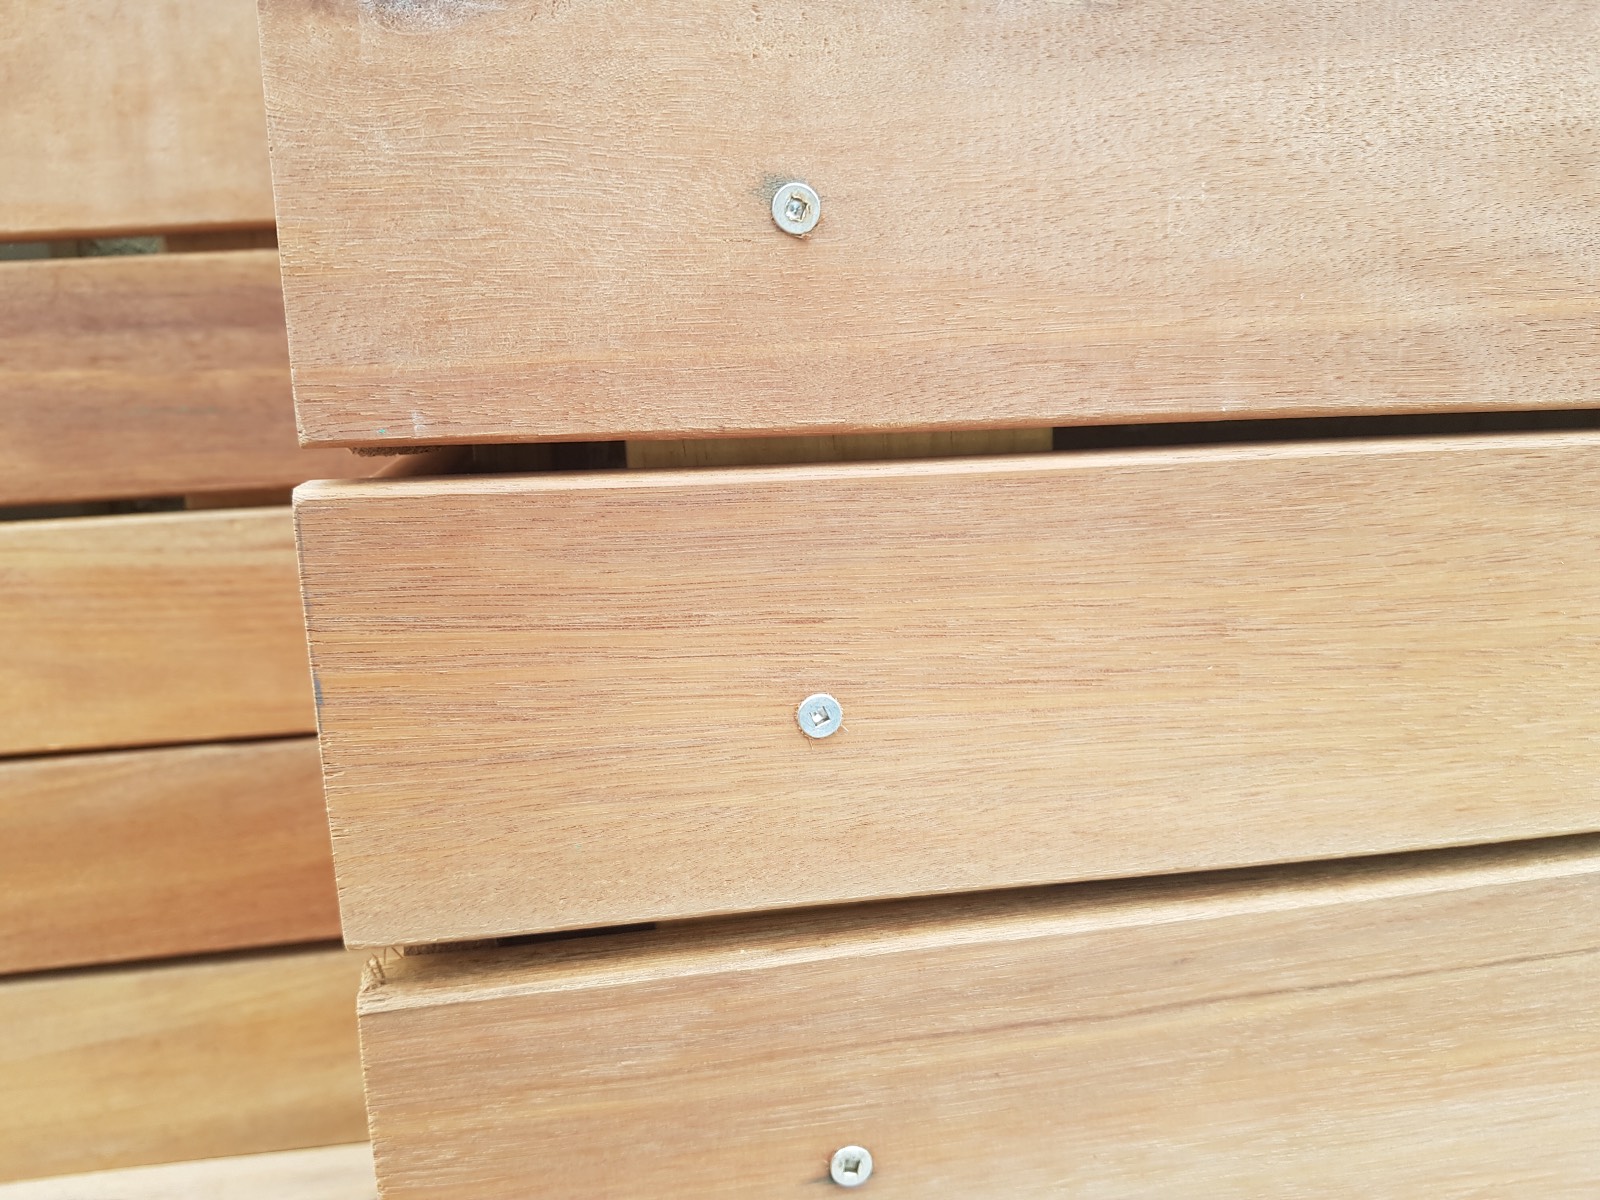 Wood cladding And screws question